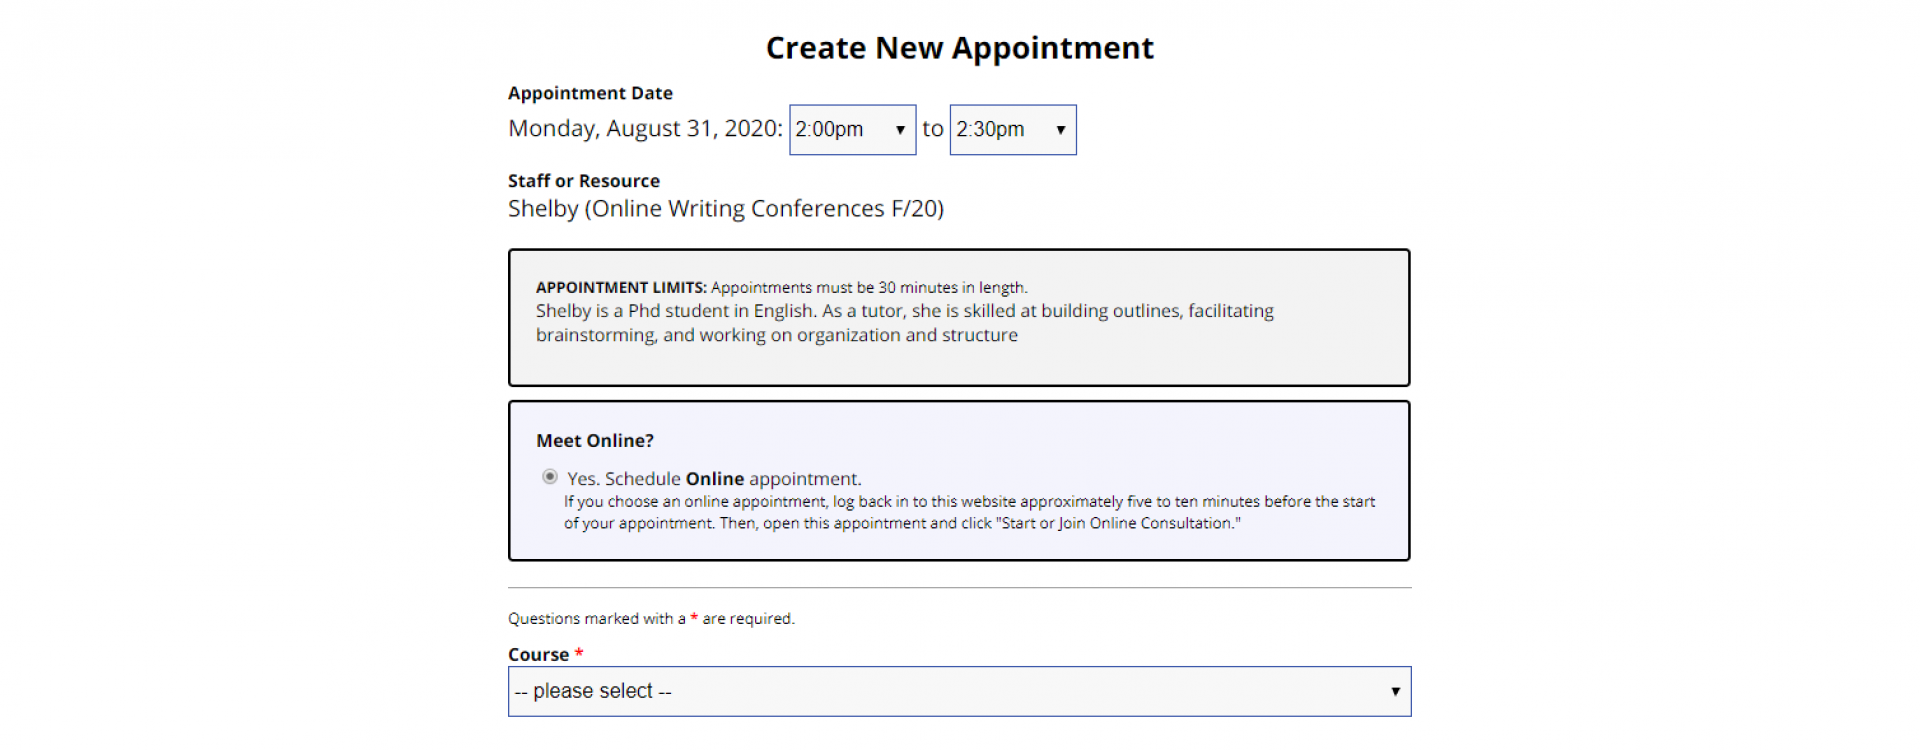 An image of the appointment form on WCOnline.